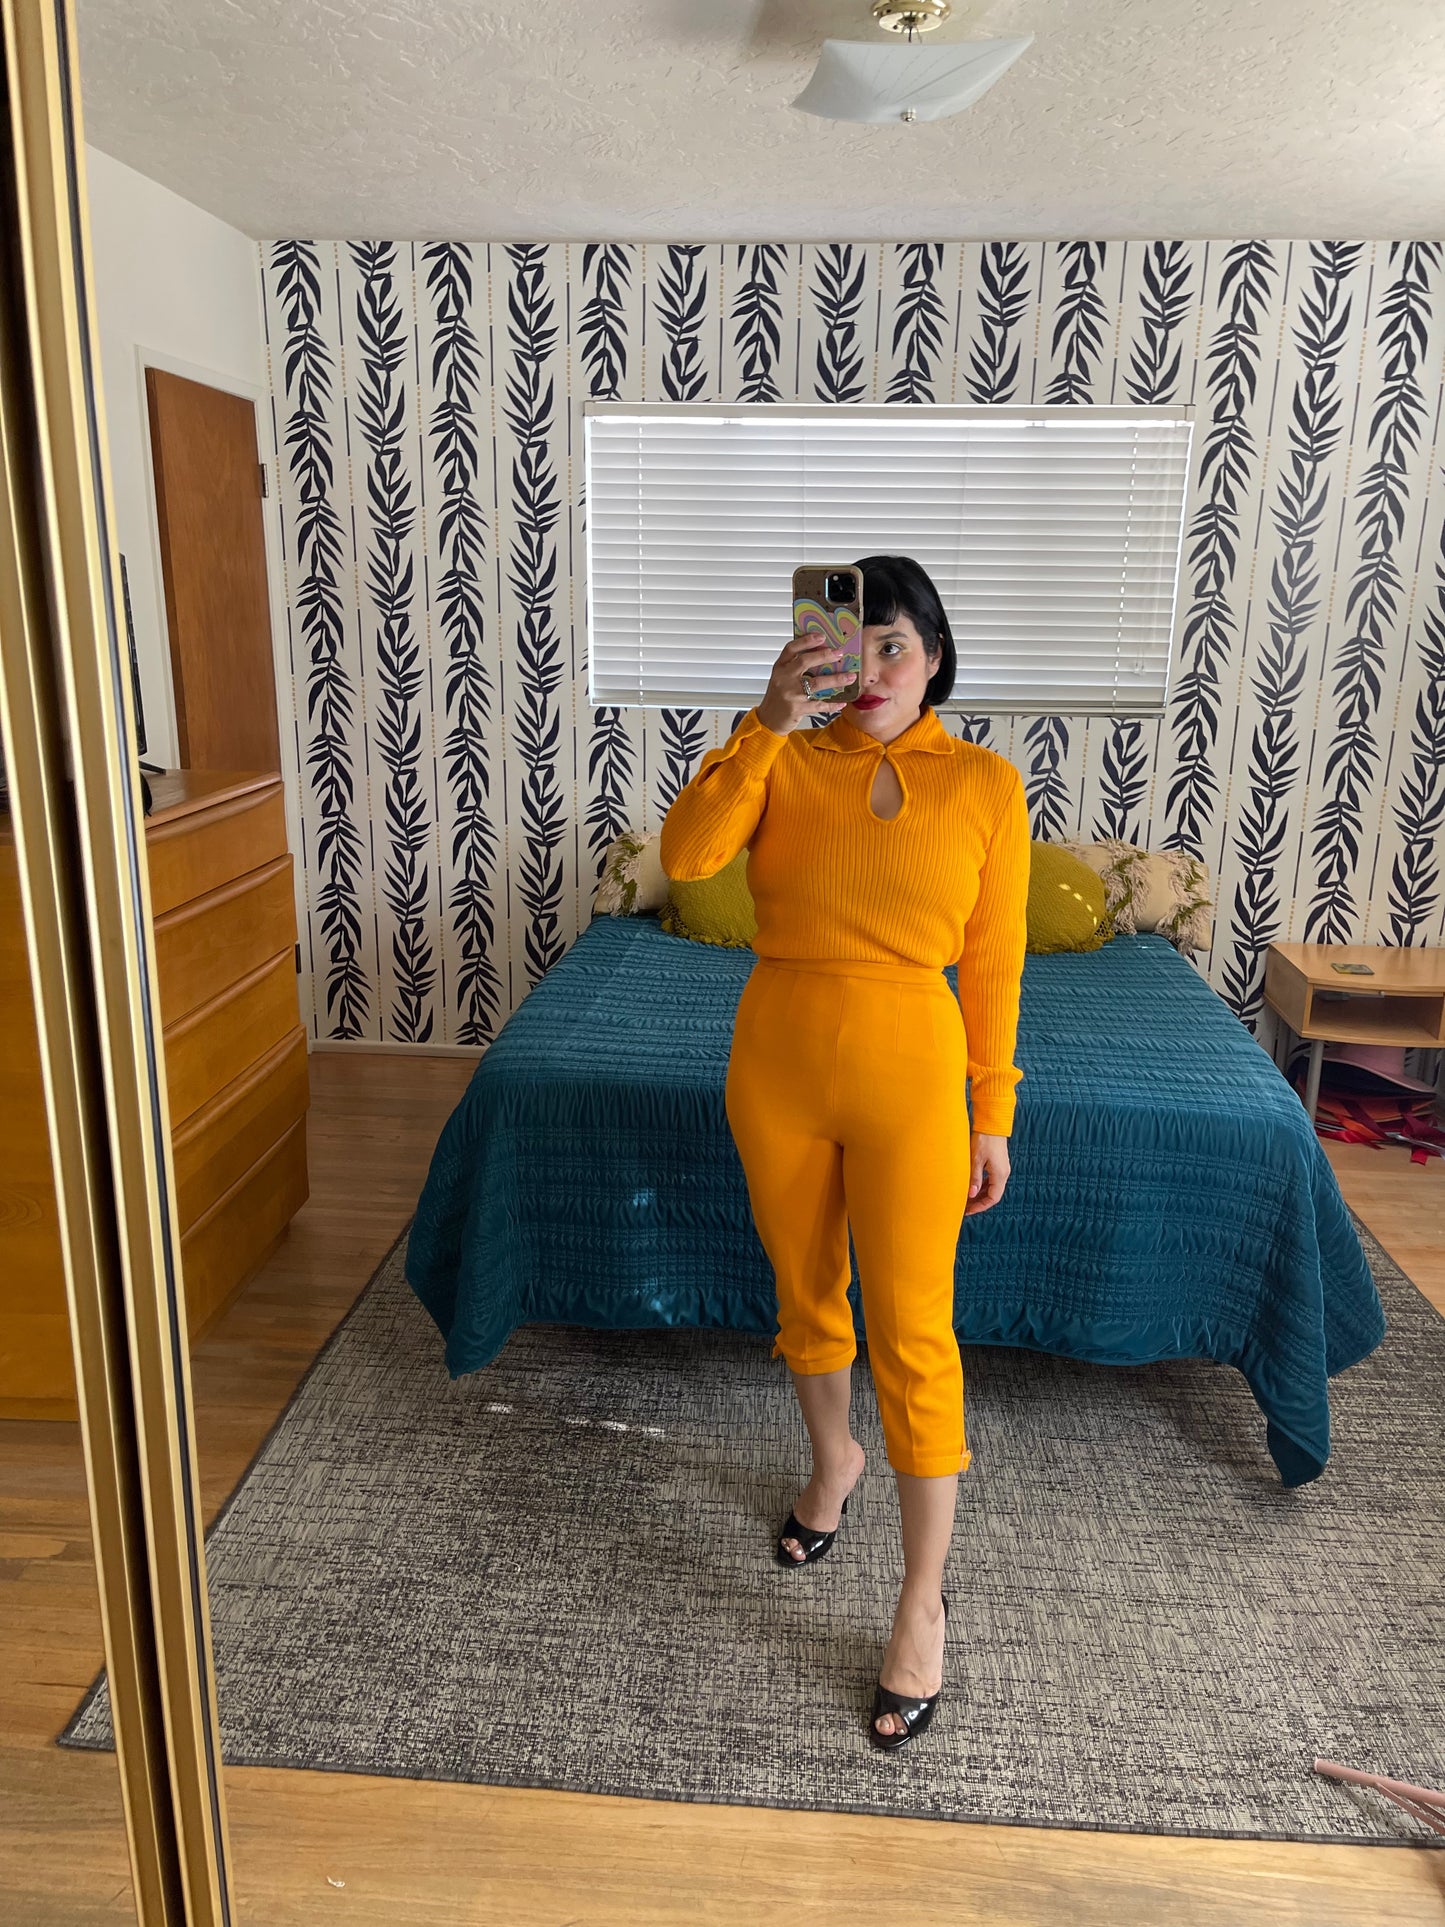 Vintage 50s 60s "Geistex by Geist and Geist" Wool Tangerine Orange Knit Sweater and Pant Matching Set Fits Sizes S-M